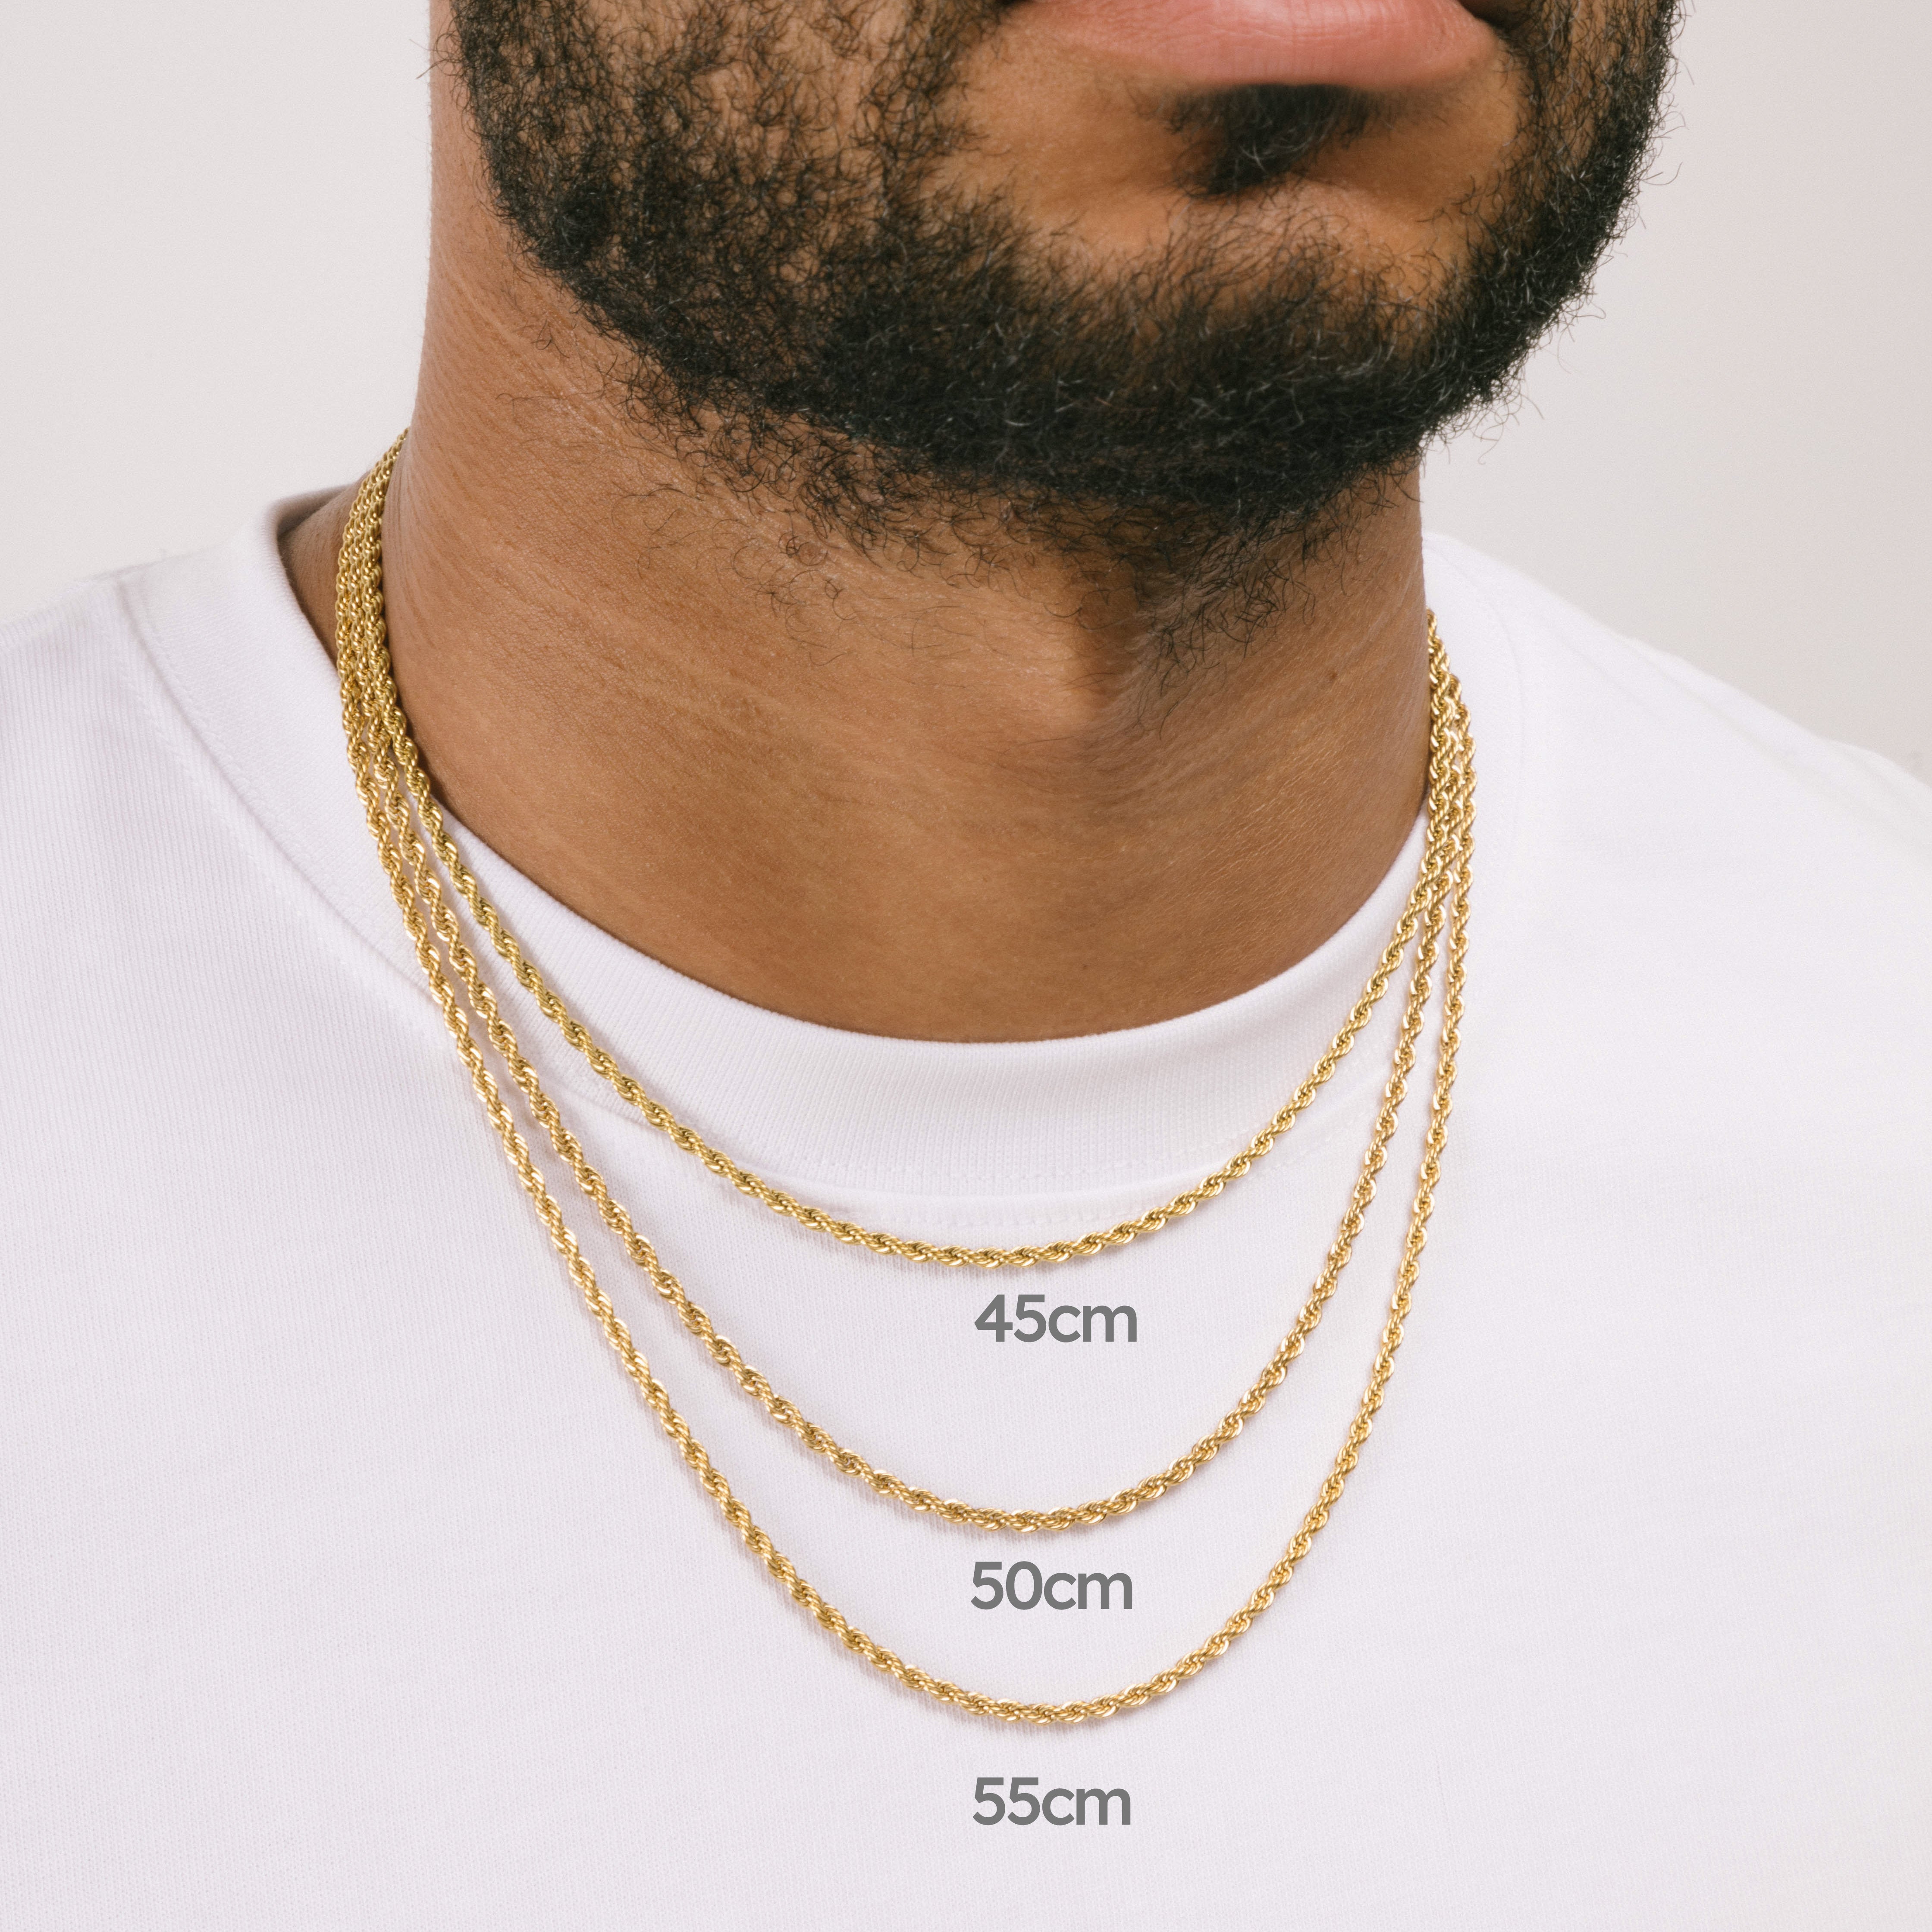 A model wearing the Twisted Rope Chain in Gold is crafted from thick 18K Gold Plated material. Dimensions are measured at 45cm, 50cm, or 55cm in length and 3mm in width. As an additional assurance, it is designed to be Allergy-free, Non-Tarnishable, and Water-resistant.